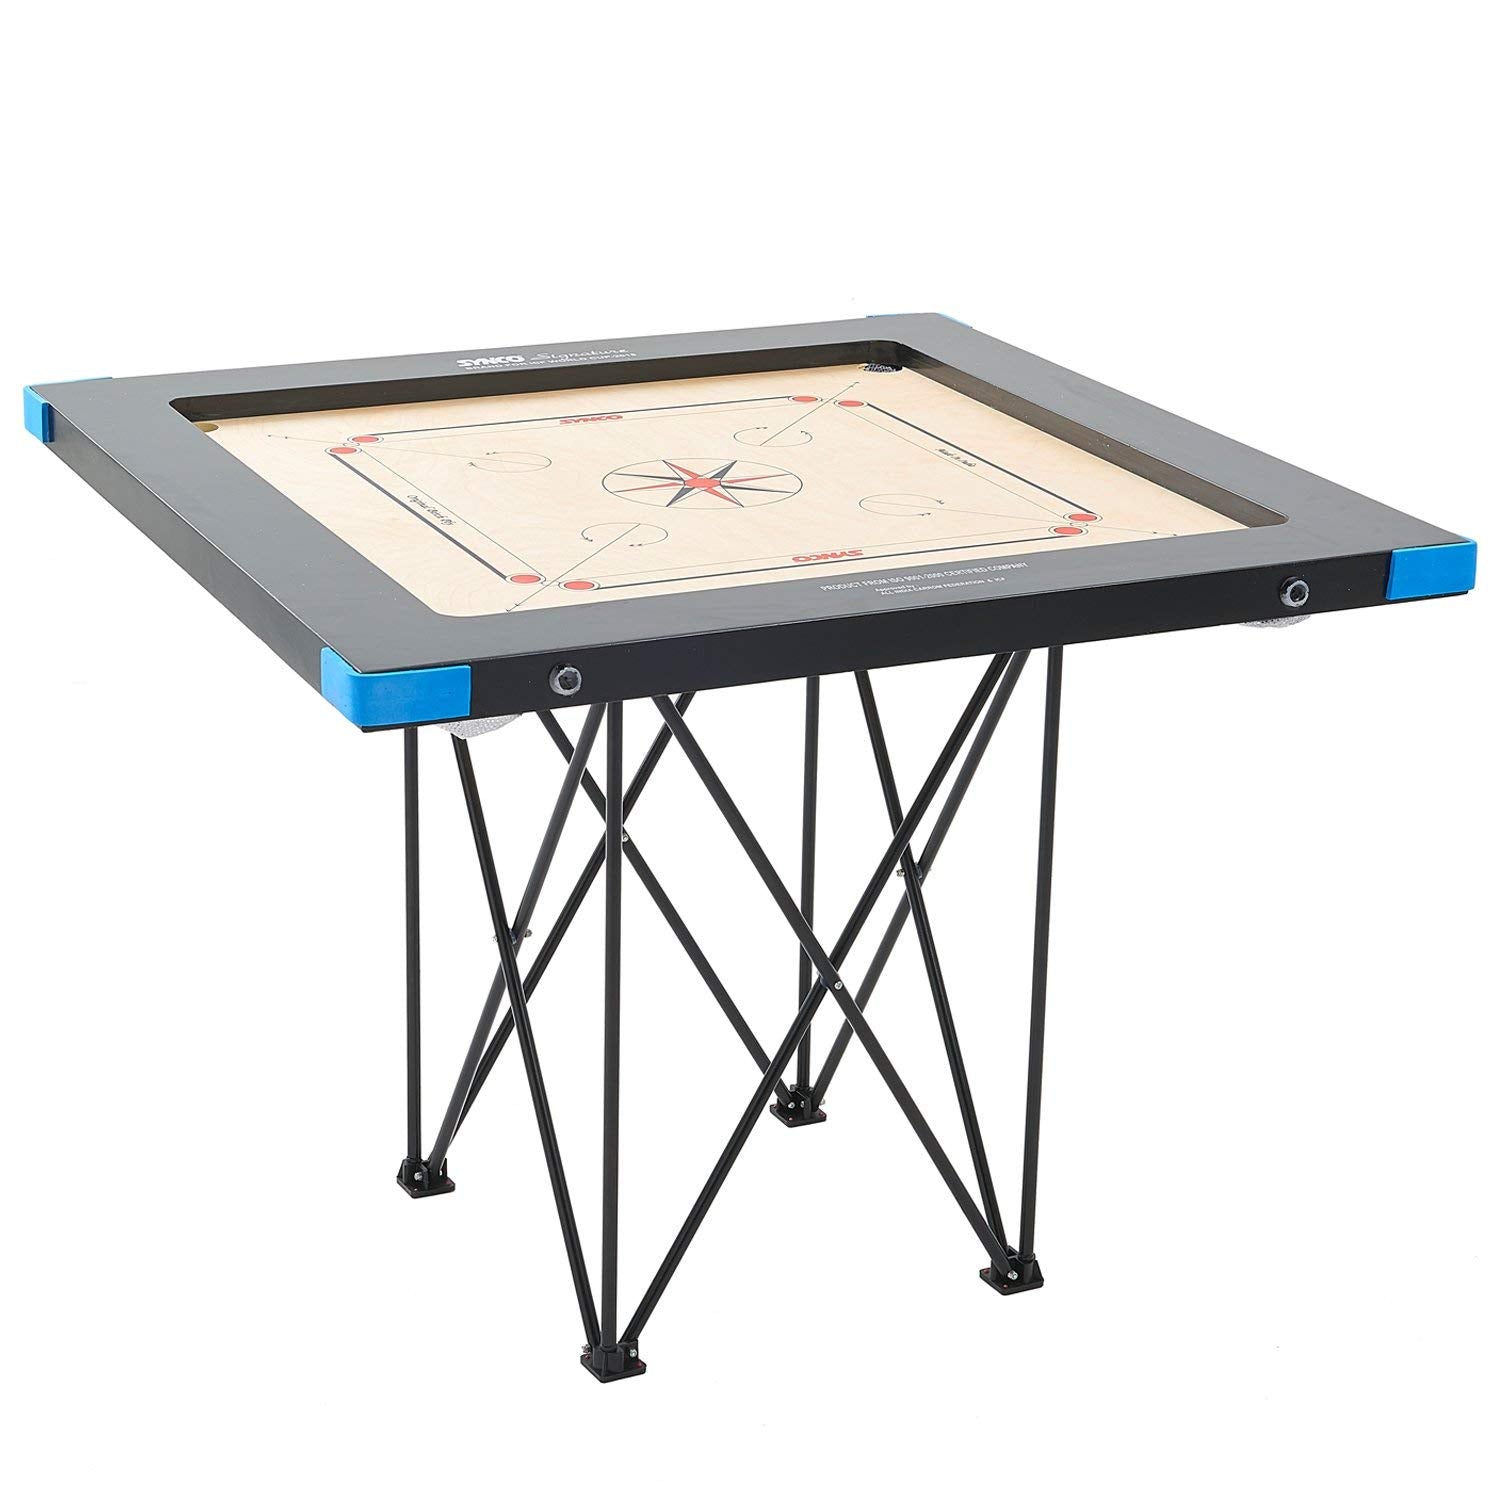 30-inch adjustable hydraulic Precise carrom stand, lightweight yet strong, powder-coated for durability, approved for tournament use by the All India Carrom Federation.